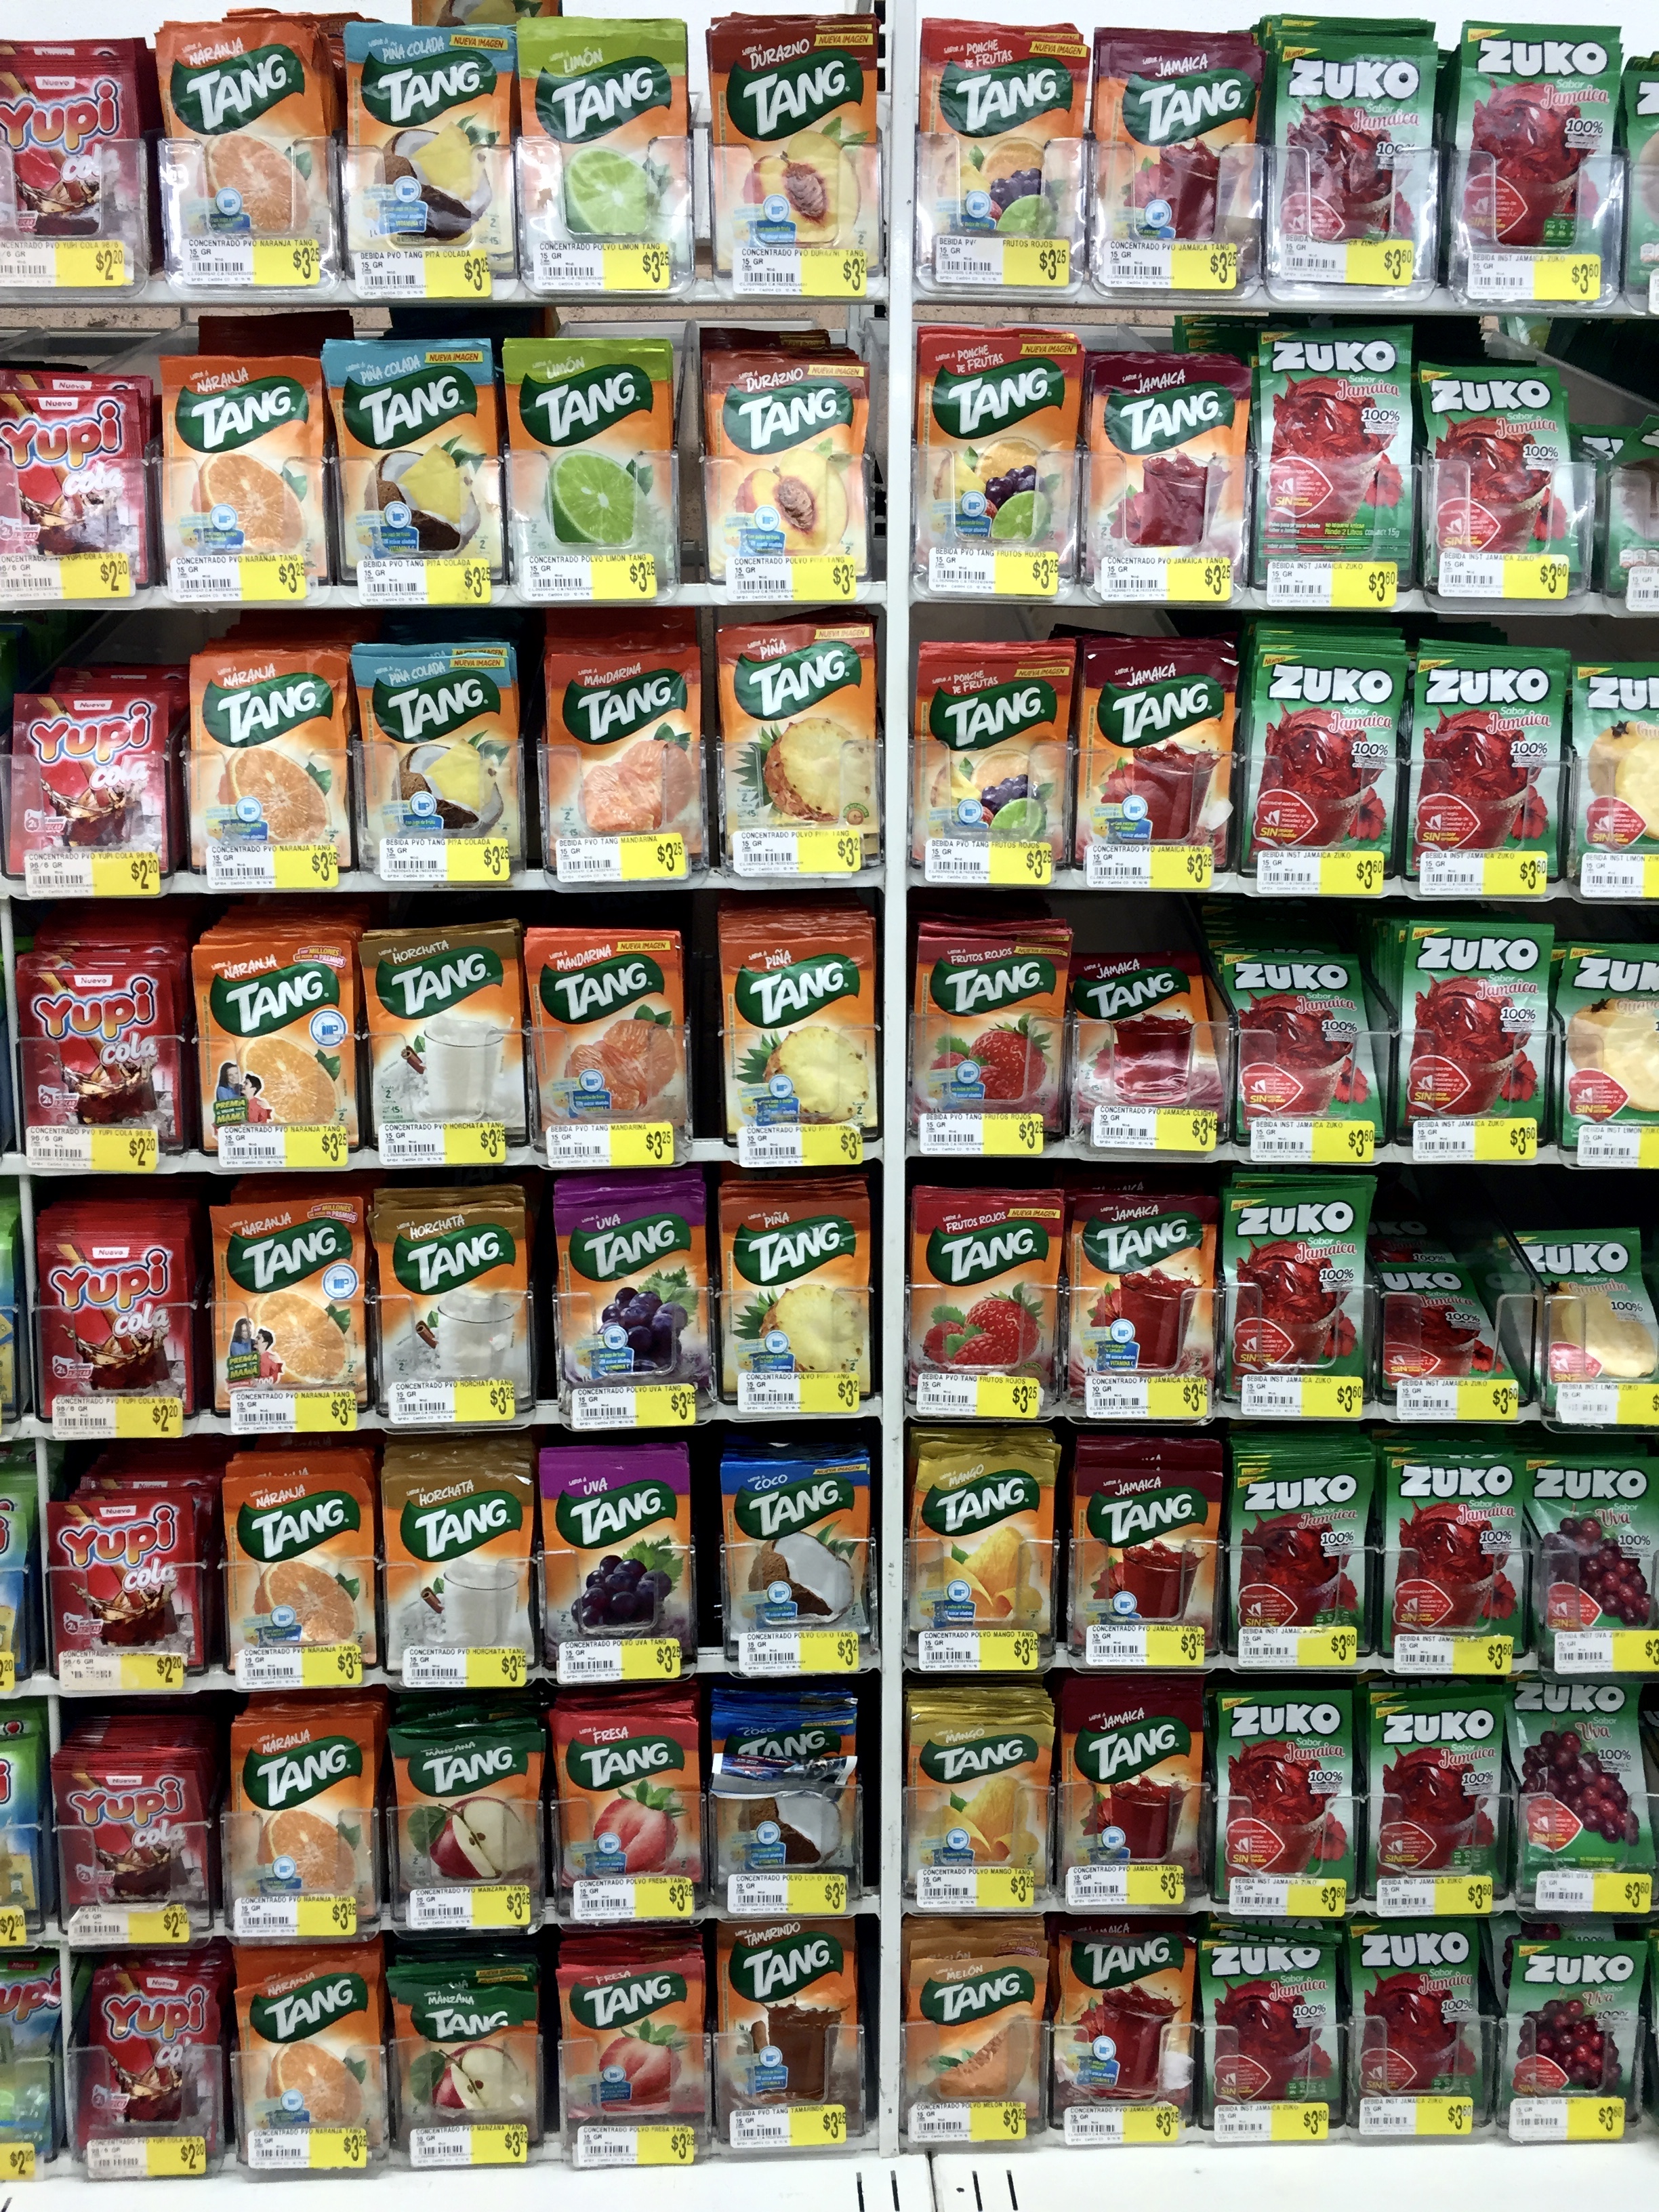 Tang is still pretty big in Mexico!